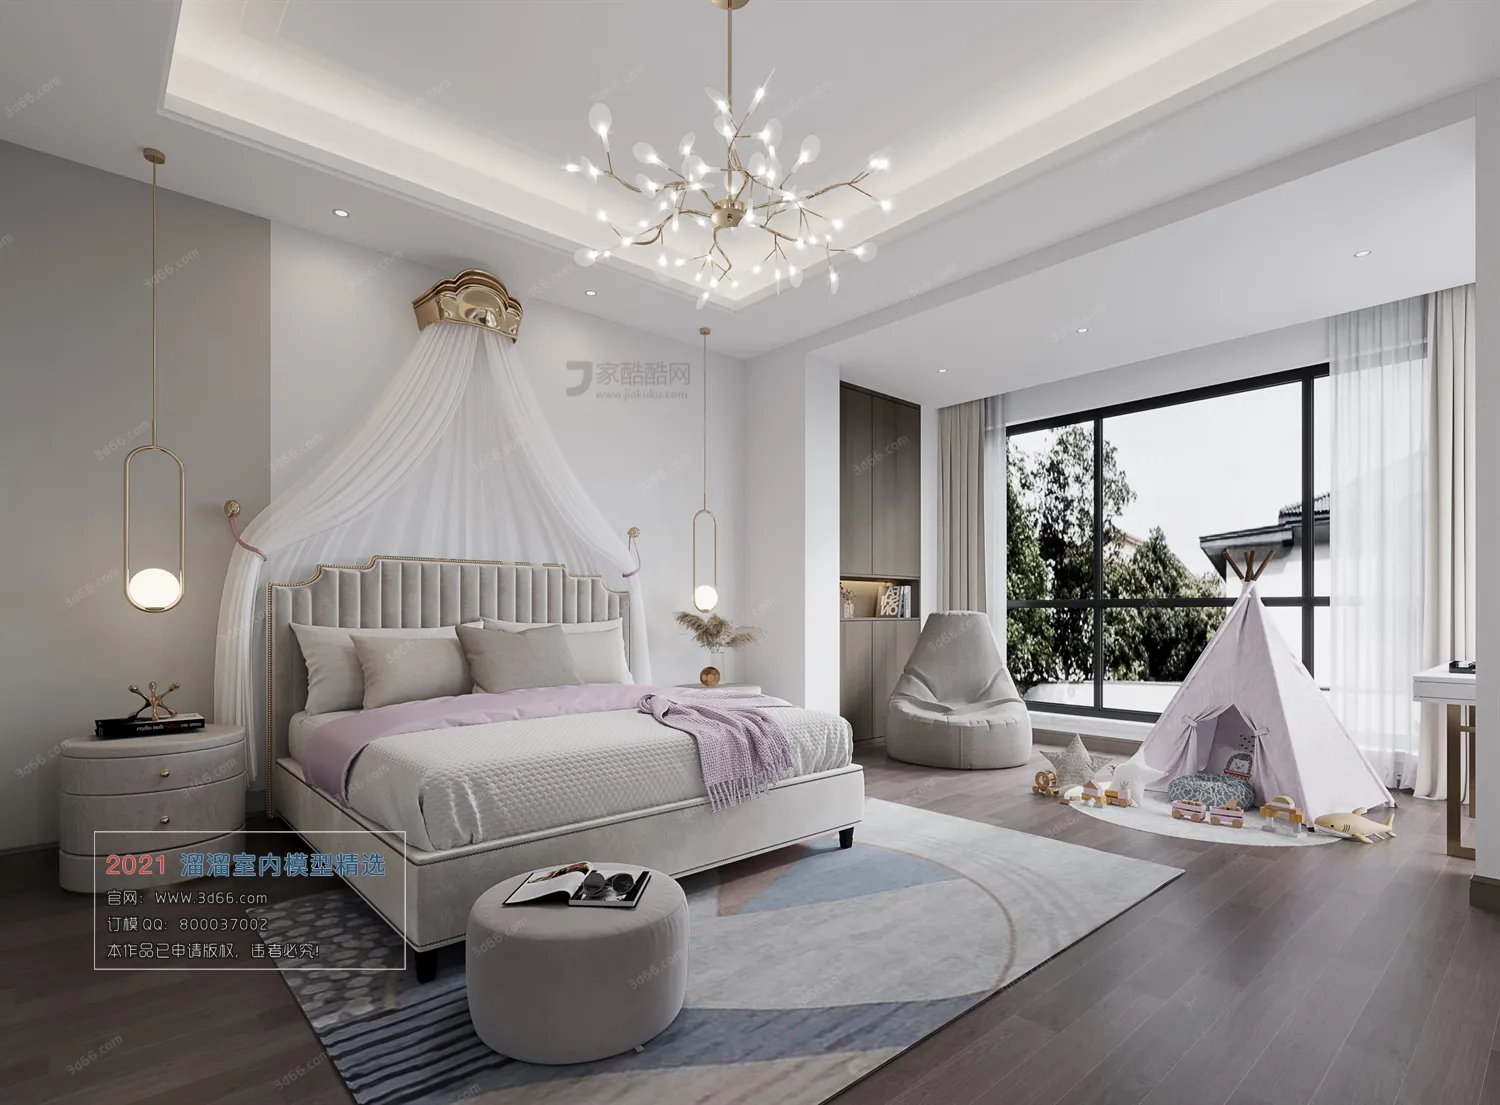 BEDROOM – A019-Modern style-Vray model